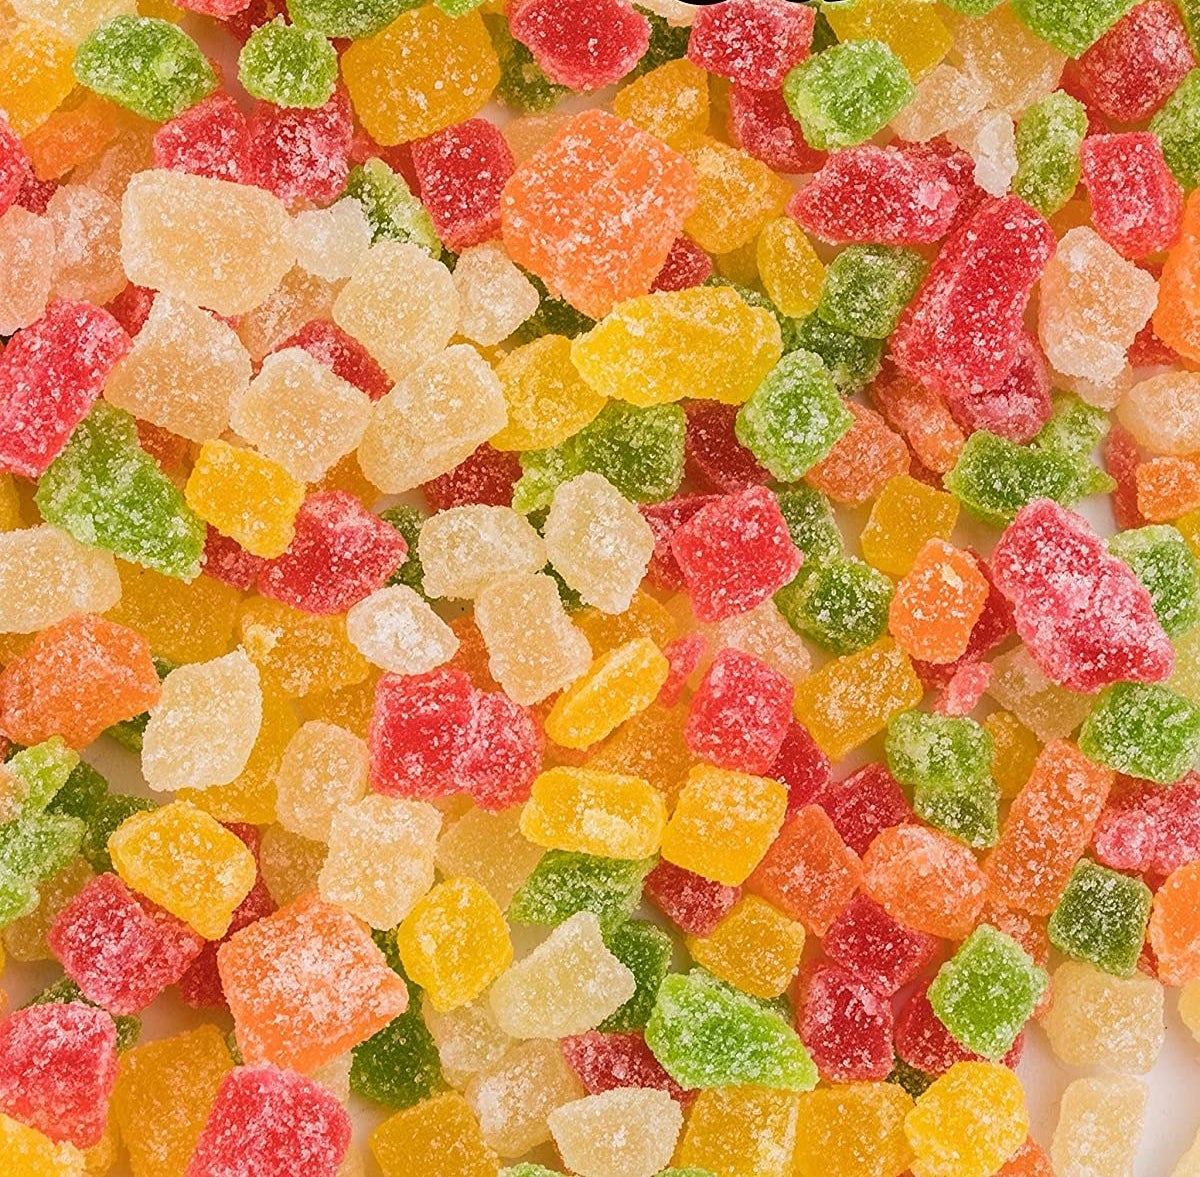 Different coloured jelly cubes spread out over the image with different fruit flavours